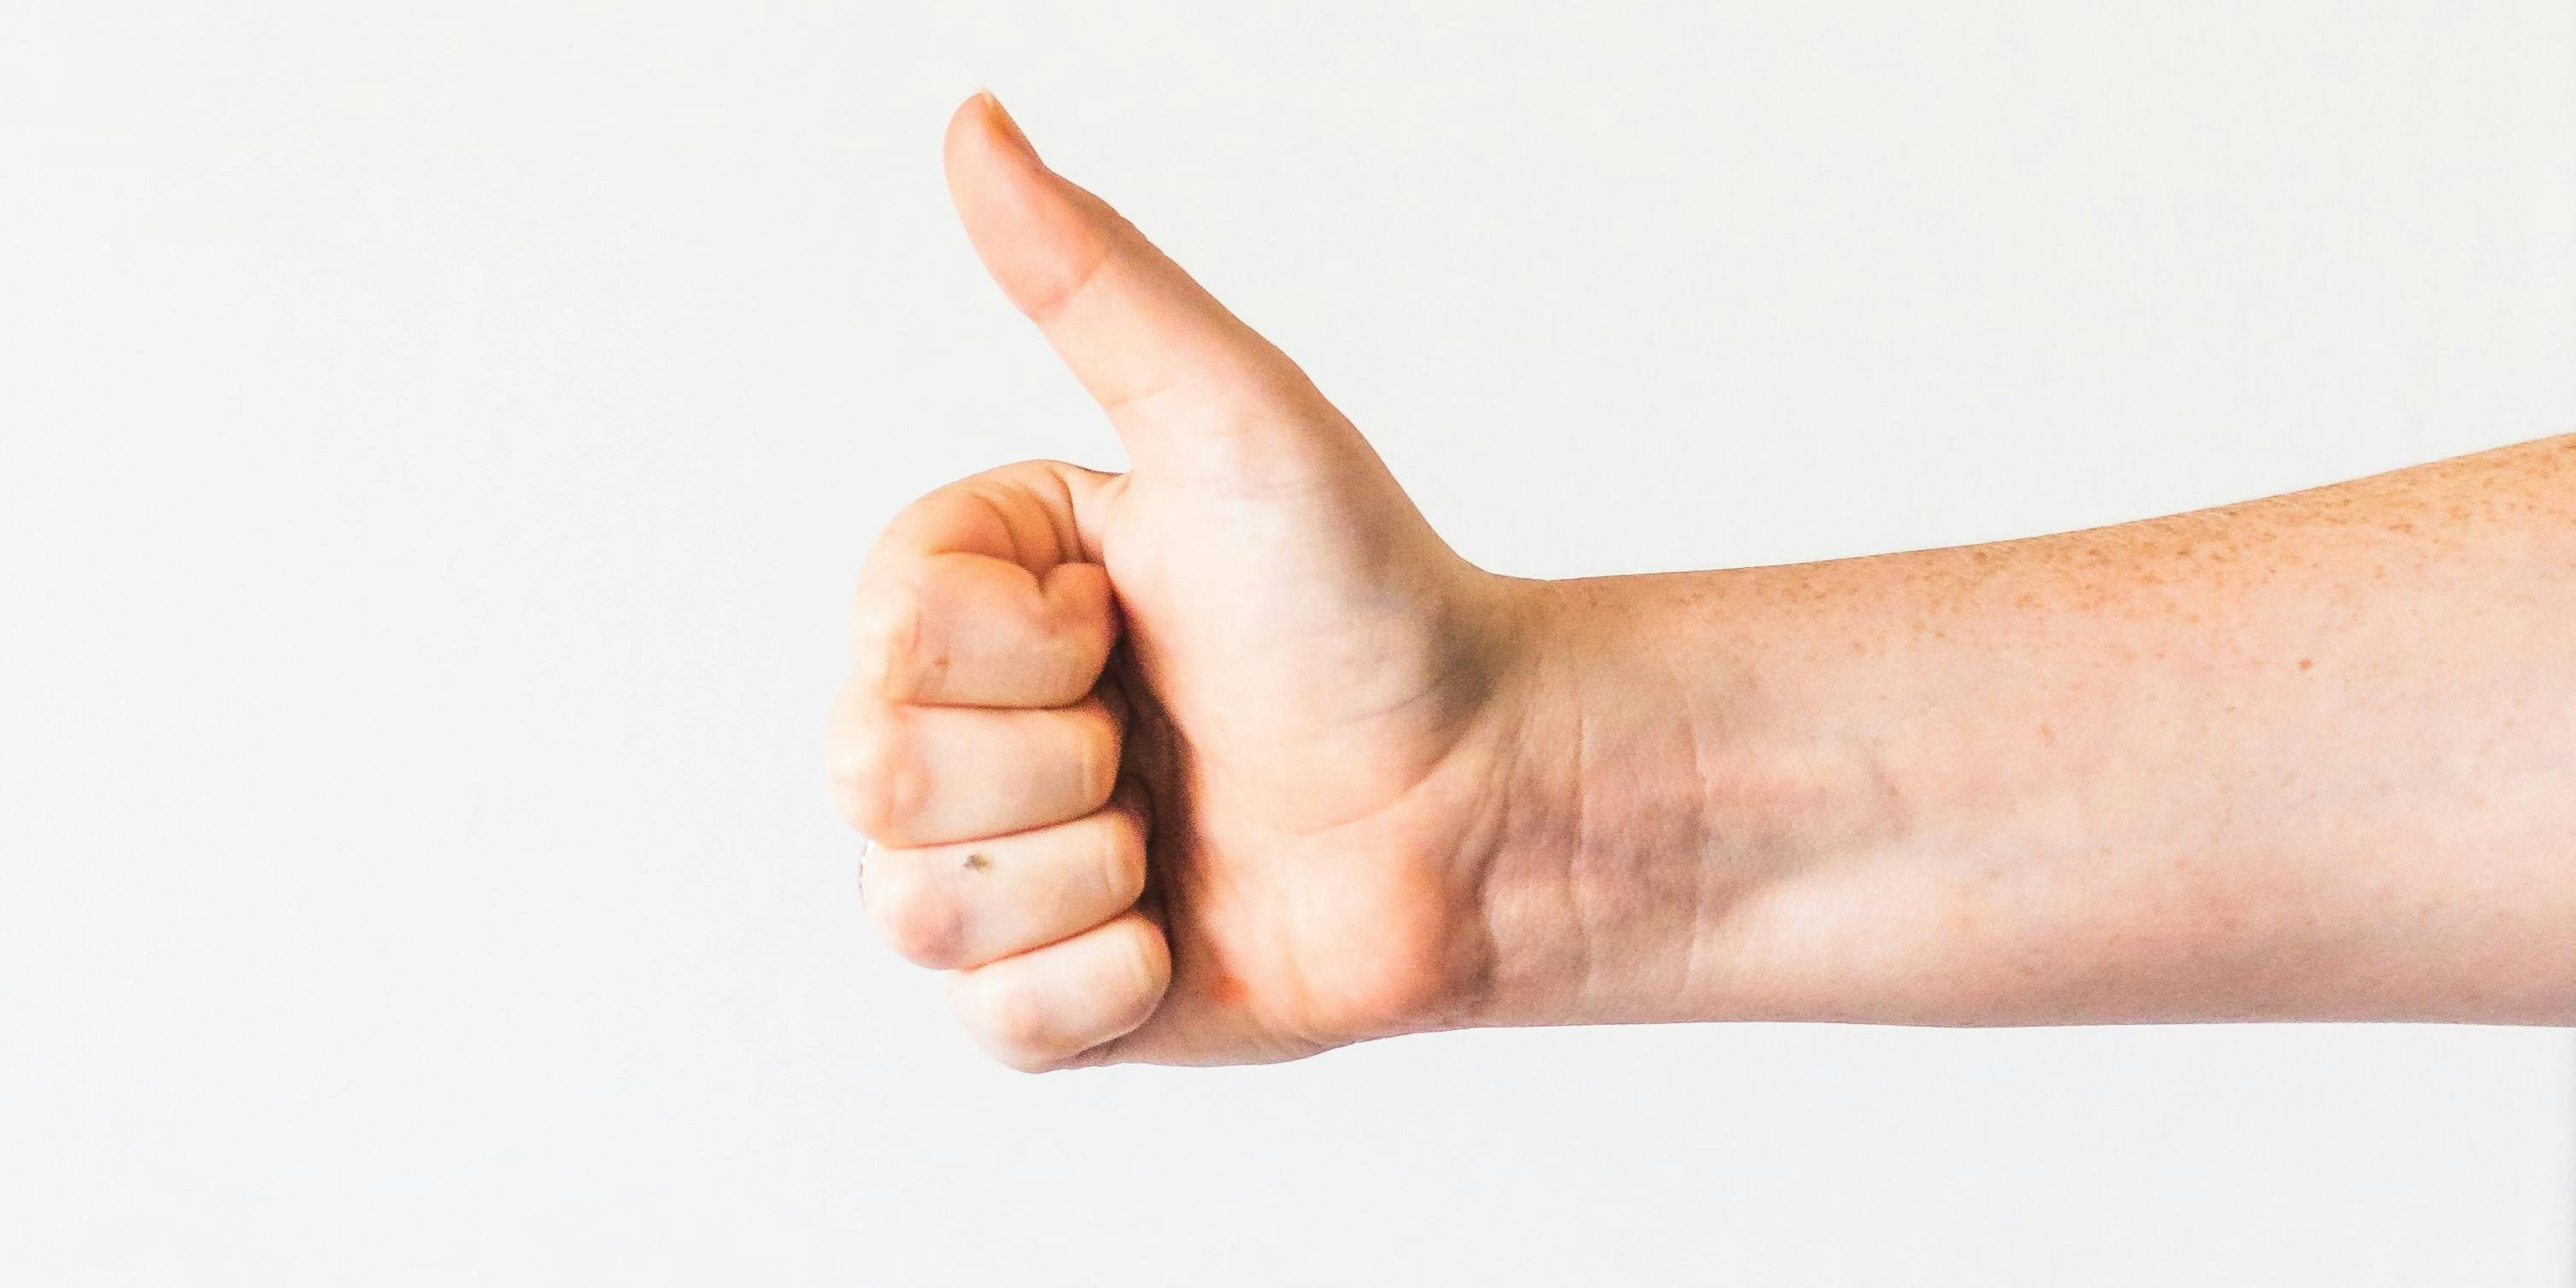 thumbs up by @sincerelymedia on Unsplash